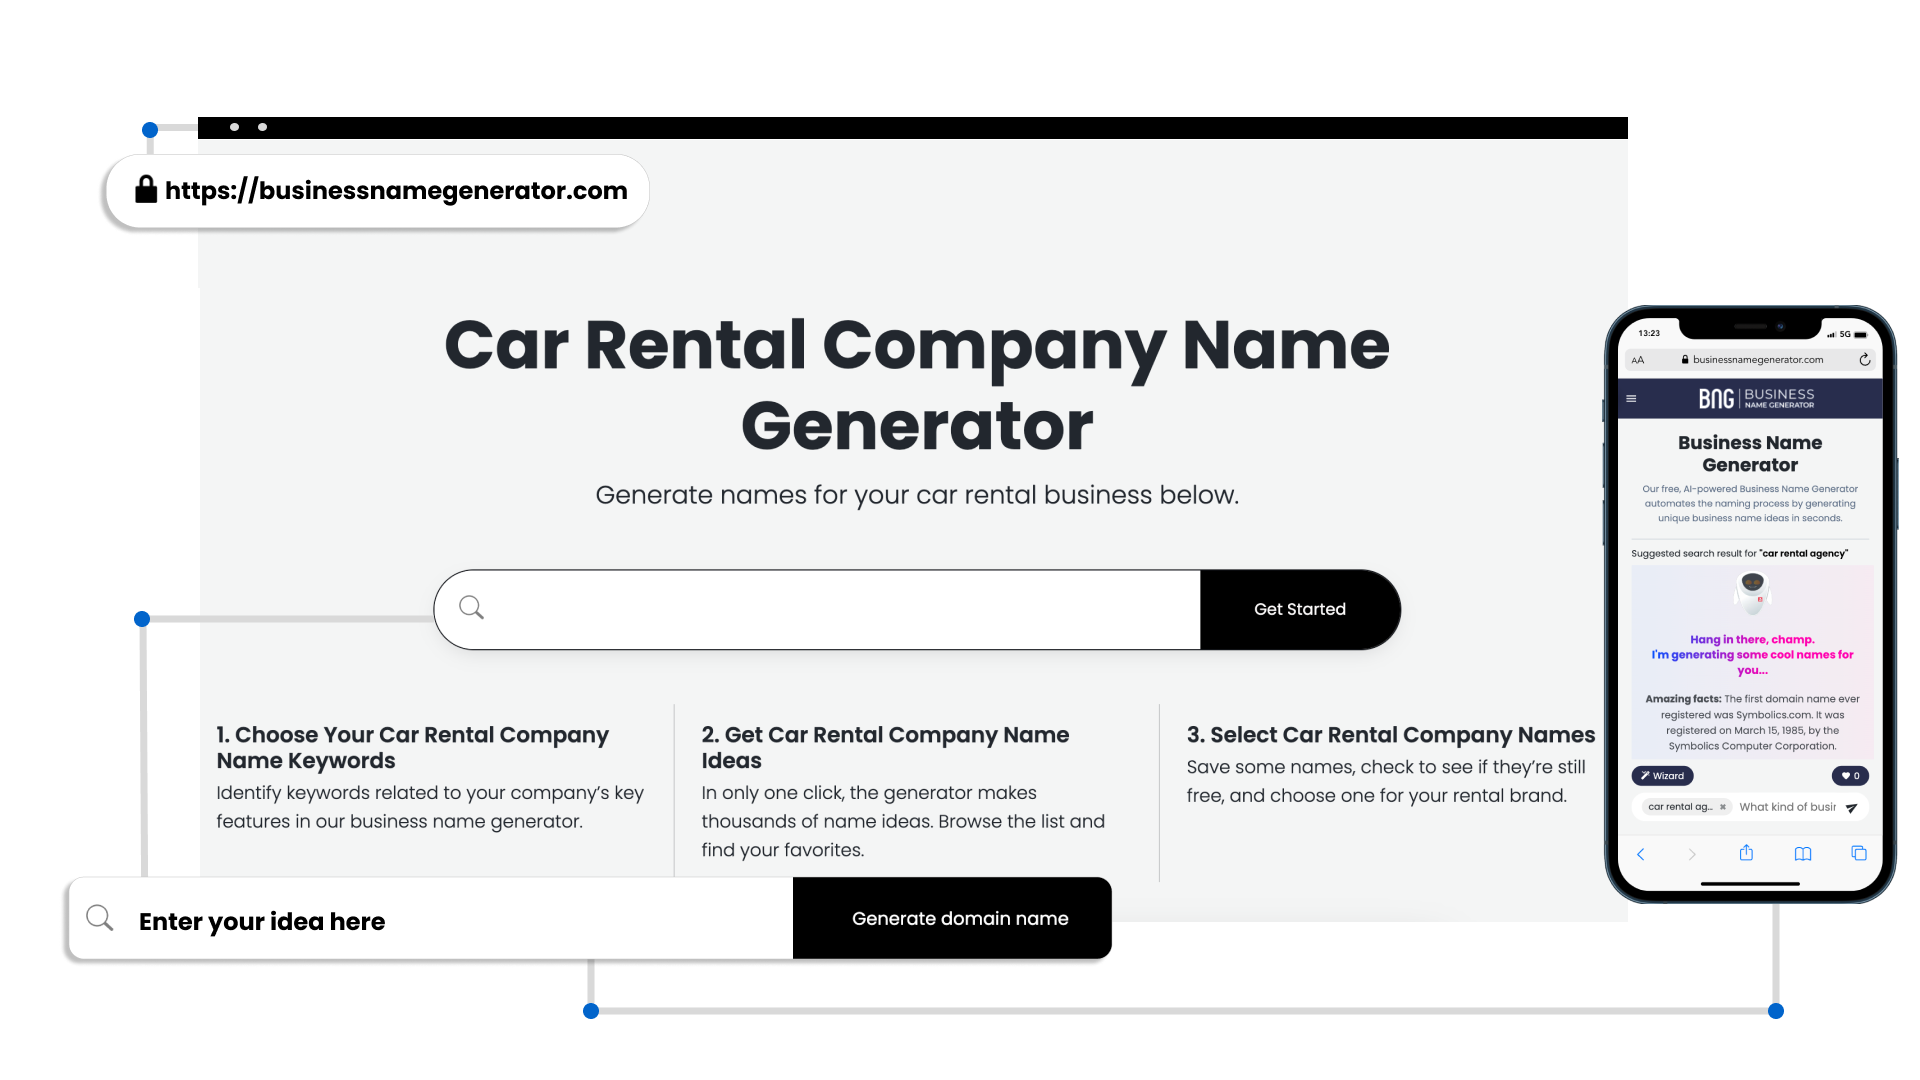 Benefits of Our Car Rental Company Name Generator